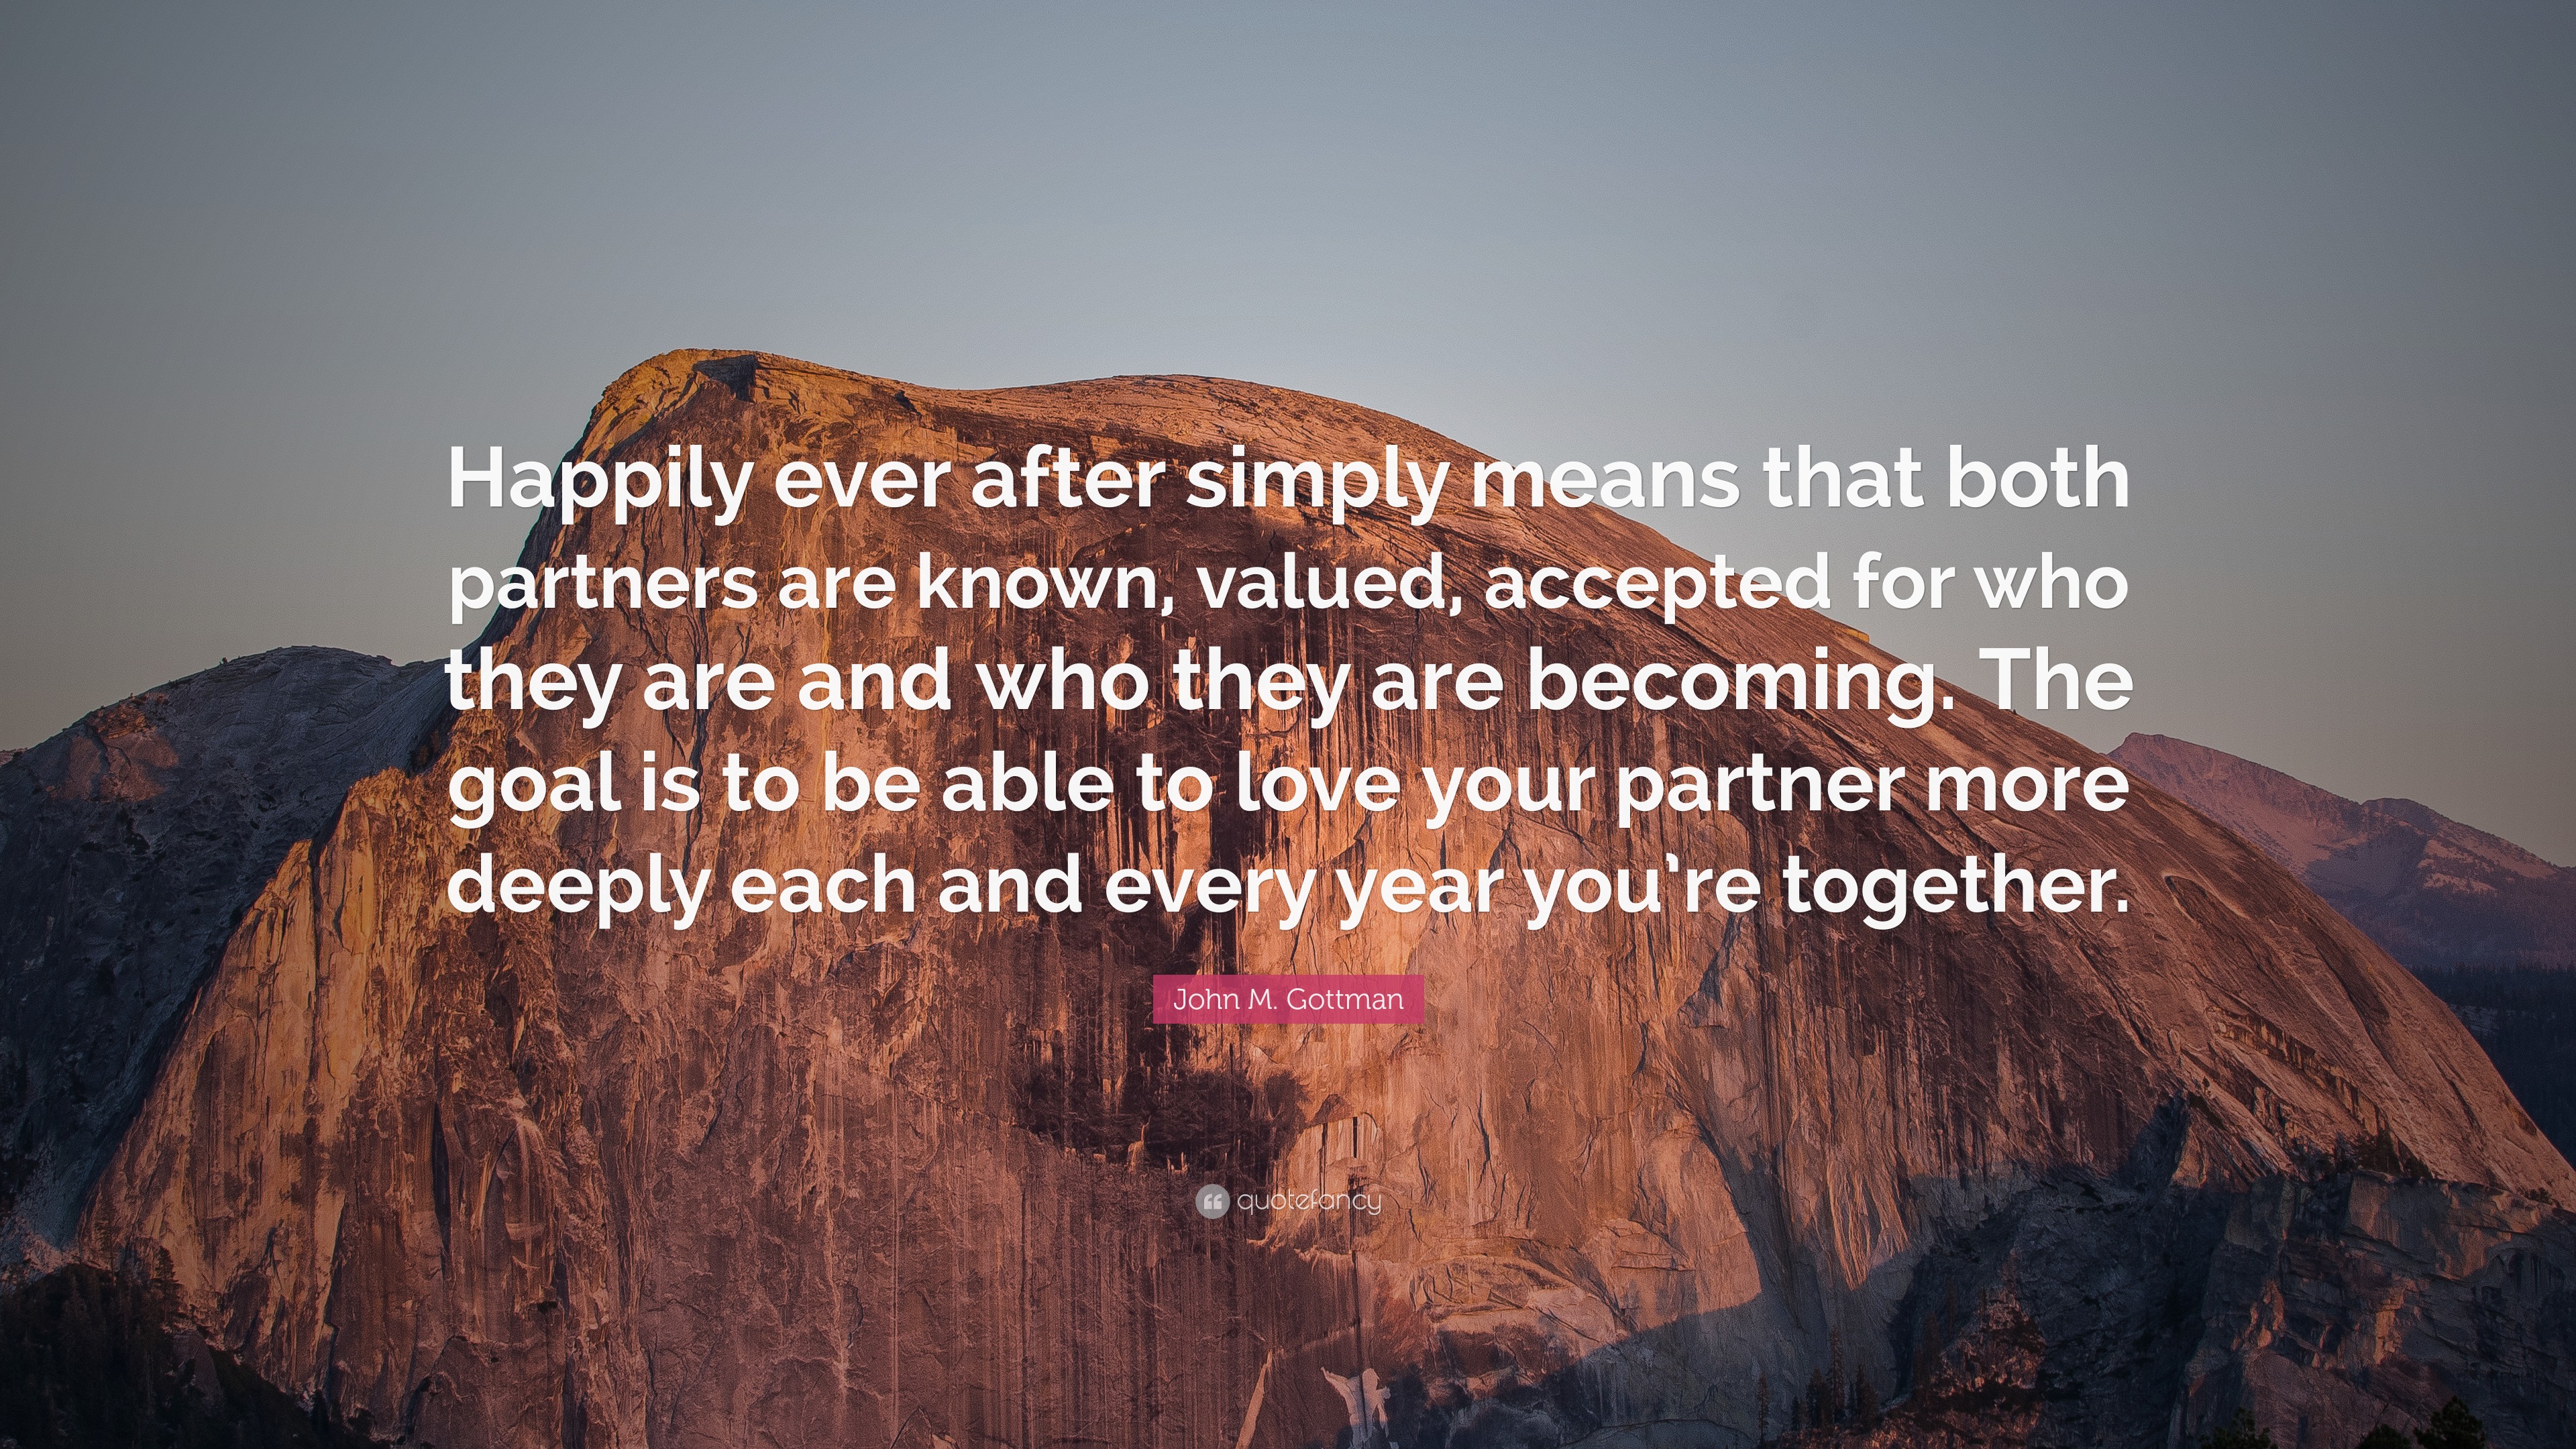 John M. Gottman Quote: “Happily ever after simply means that both ...